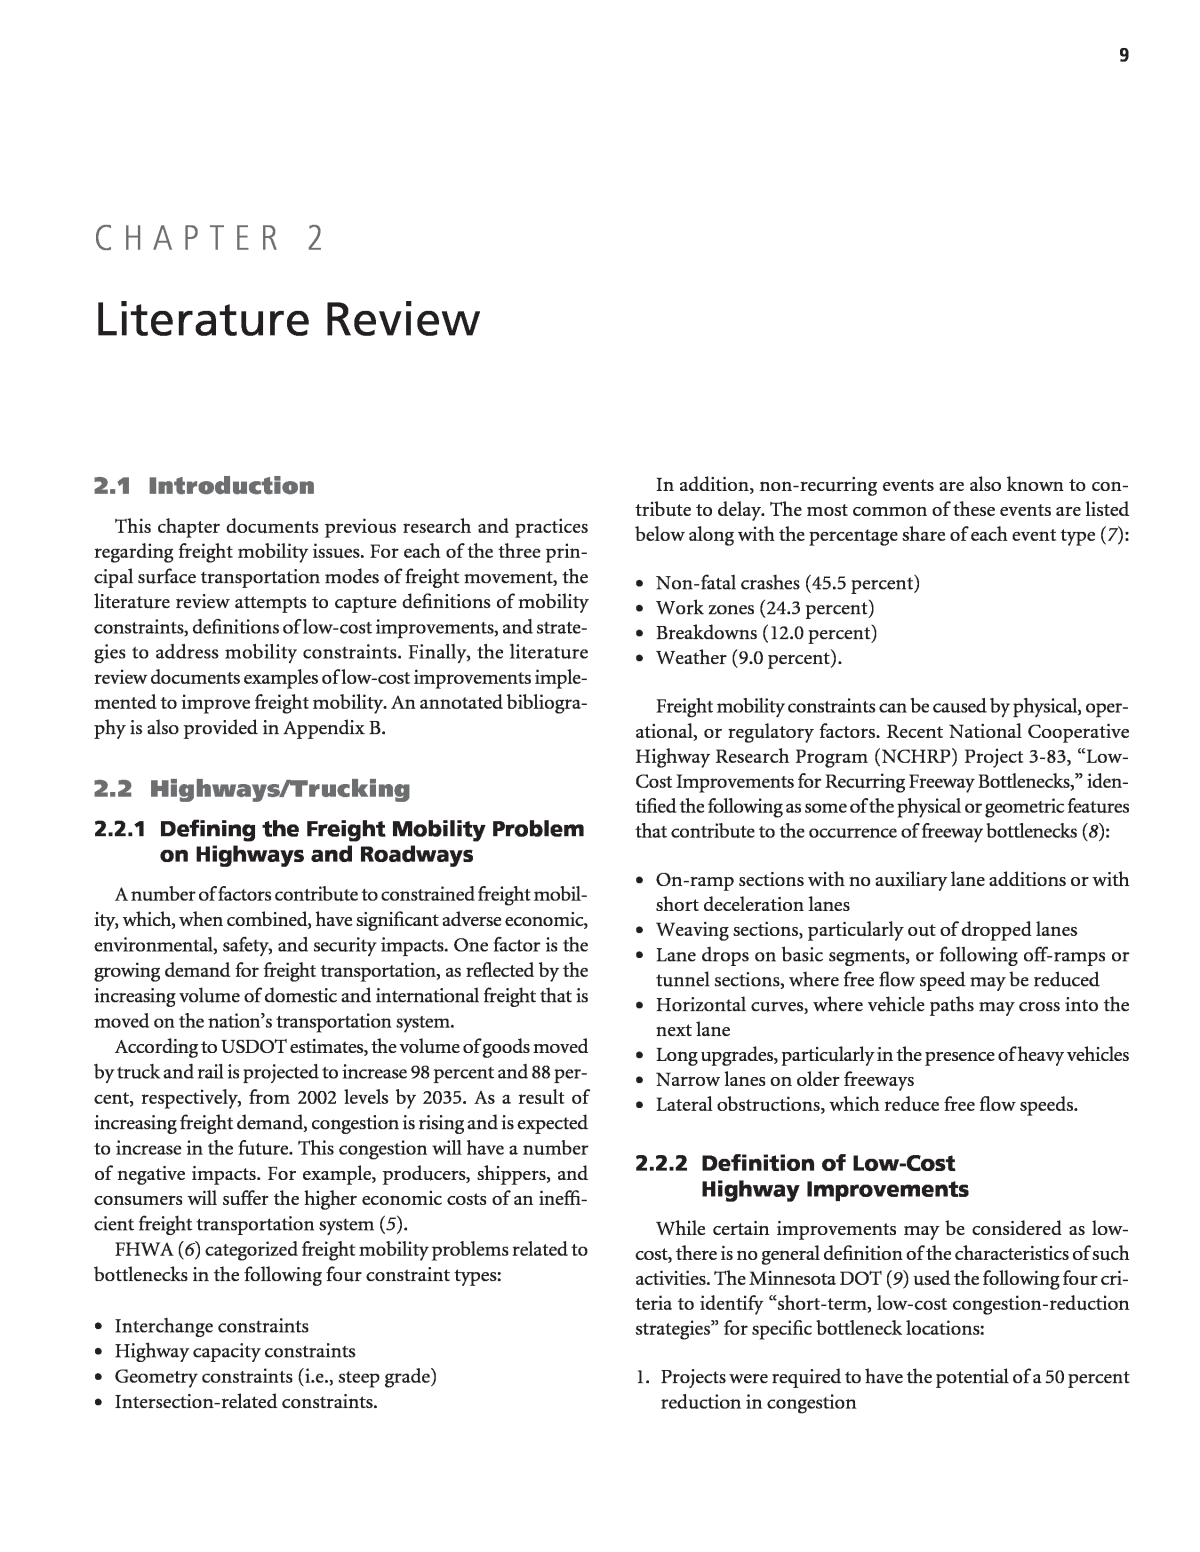 Chapter 23 - Literature Review  Identifying and Using Low-Cost and